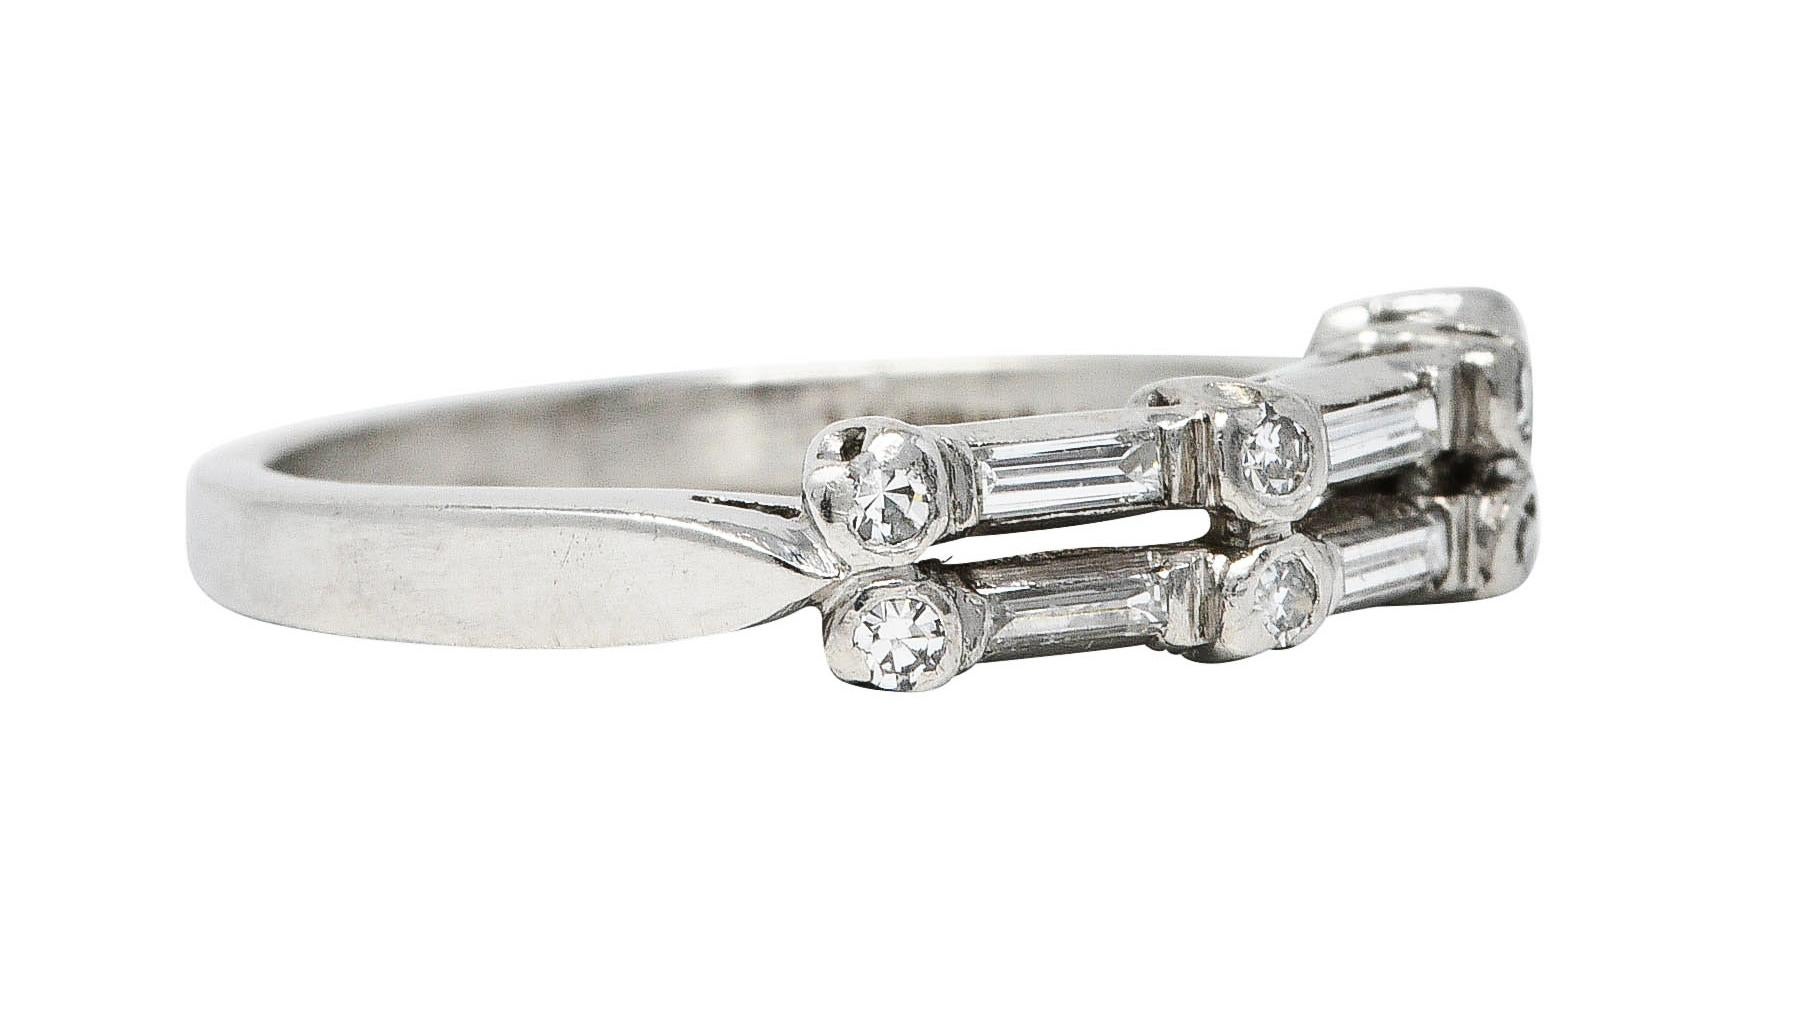 Band ring is comprised of two rows of baguette and single cut diamonds

Alternating in a dot and dash motif

While weighing in total approximately 0.65 carat with G to I color and VS to SI clarity

With maker's mark and stamped for platinum

Circa: